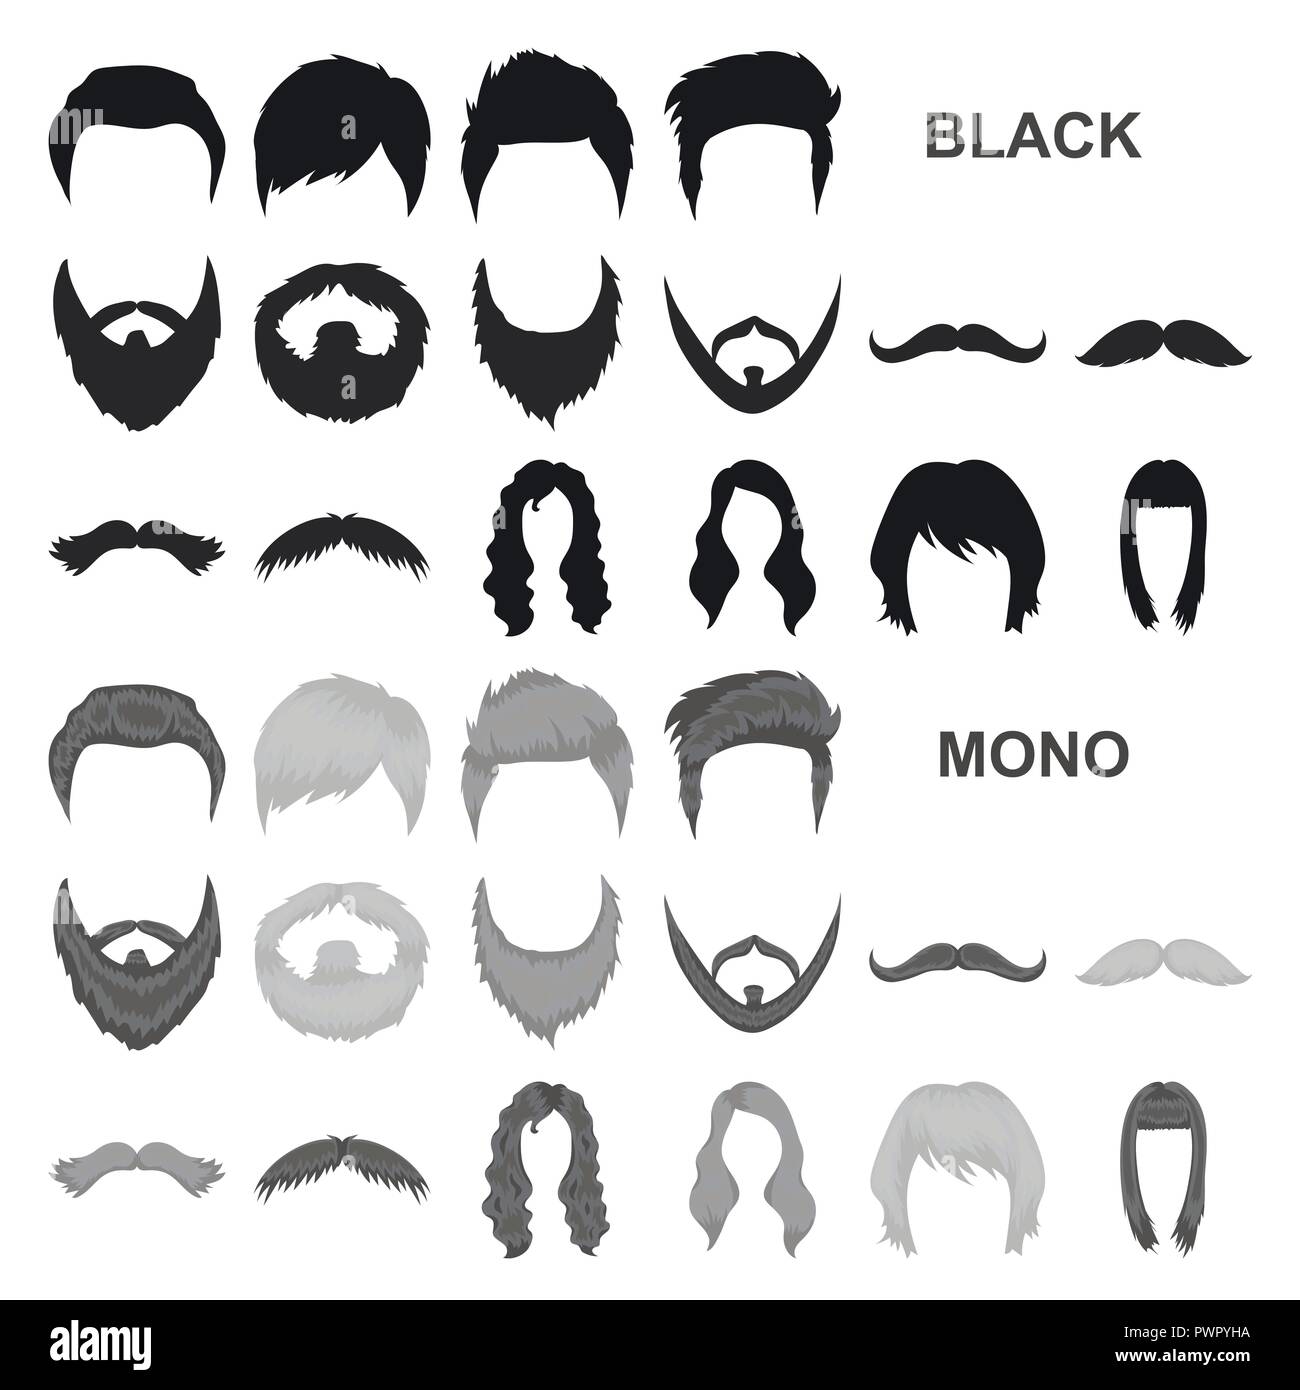 art,beard,black,blond,blonde,brown,care,collection,curl,design,fashion, female,hair,haircut,hairdresser,hairstyle ,icon,illustration,image,isolated,logo,man,model ,mustache,red,scythe,set,shave,sign,style,symbol,tail,type,variety,vector,web,woman,  Vector ...